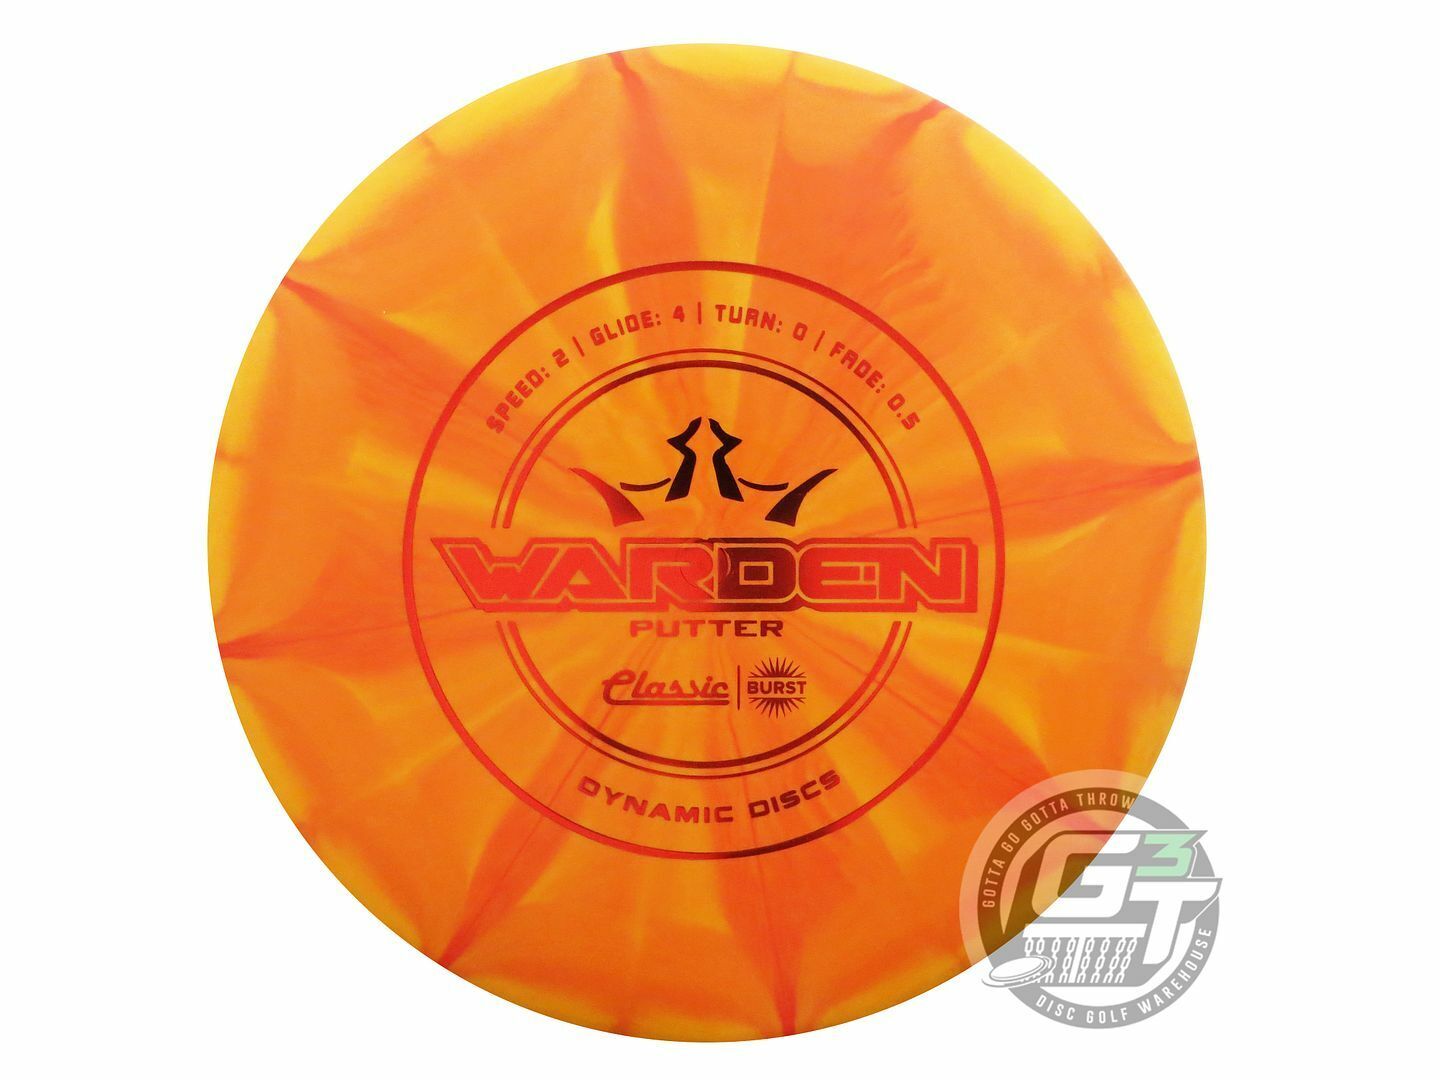 Dynamic Discs Classic Line Burst Warden Putter Golf Disc (Individually Listed)